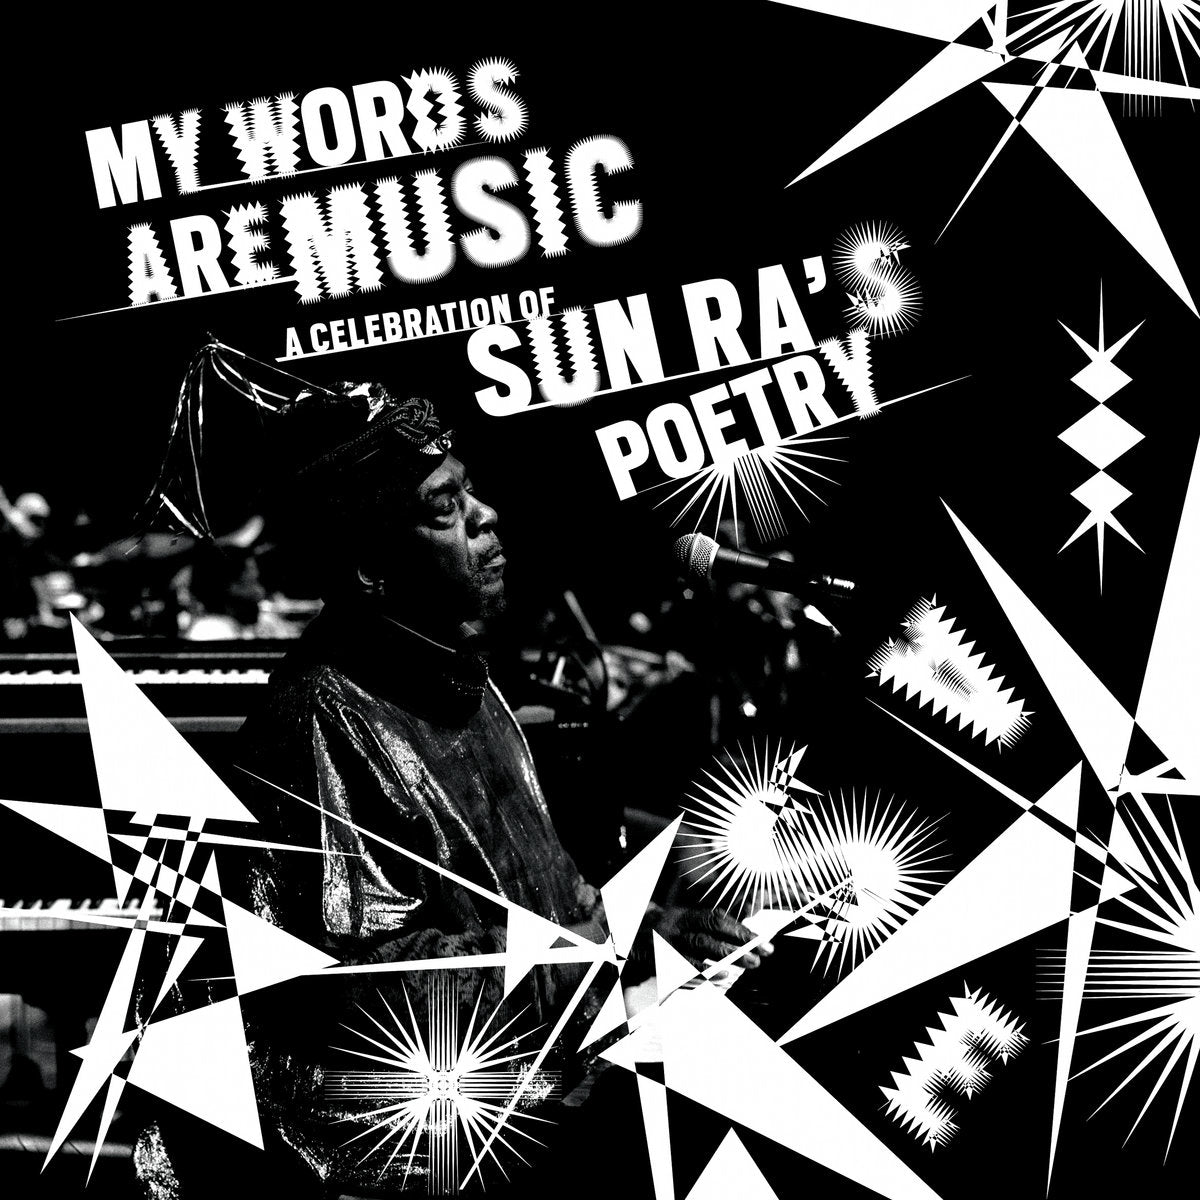 |v/a| "My Words Are Music: A Celebration of Sun Ra's Poetry"